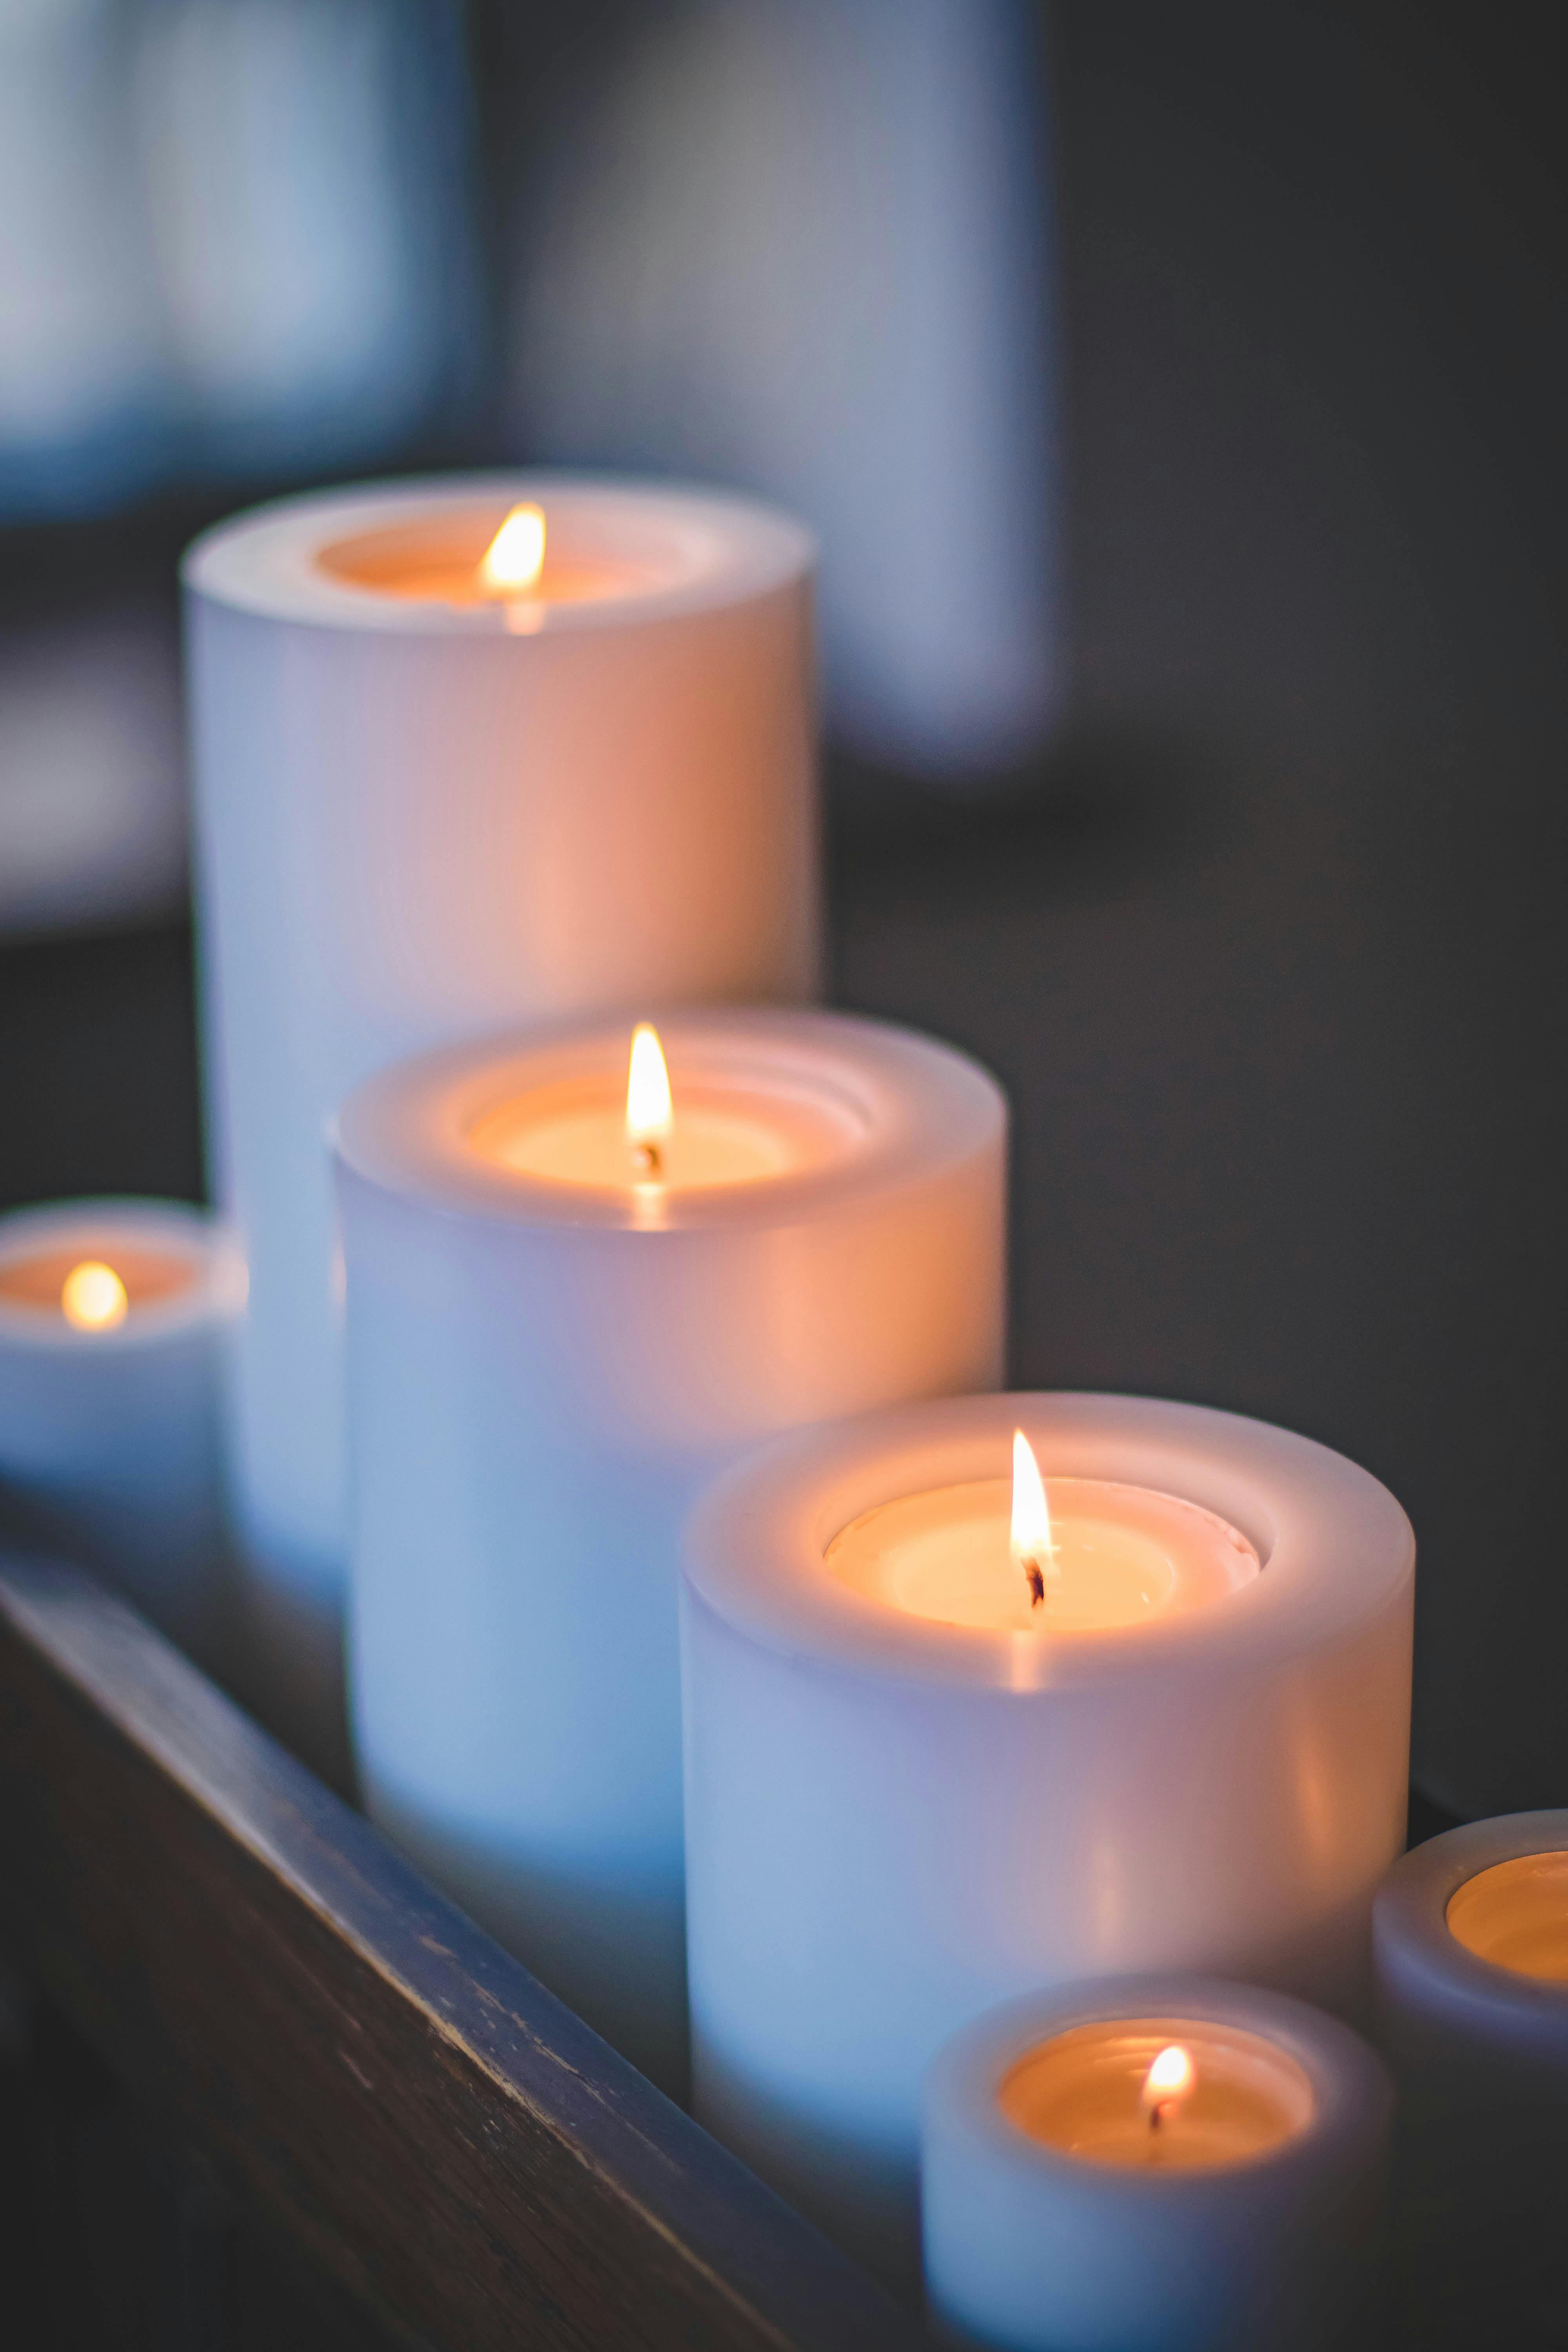 A close up photo of burning candles | Source: Pexels